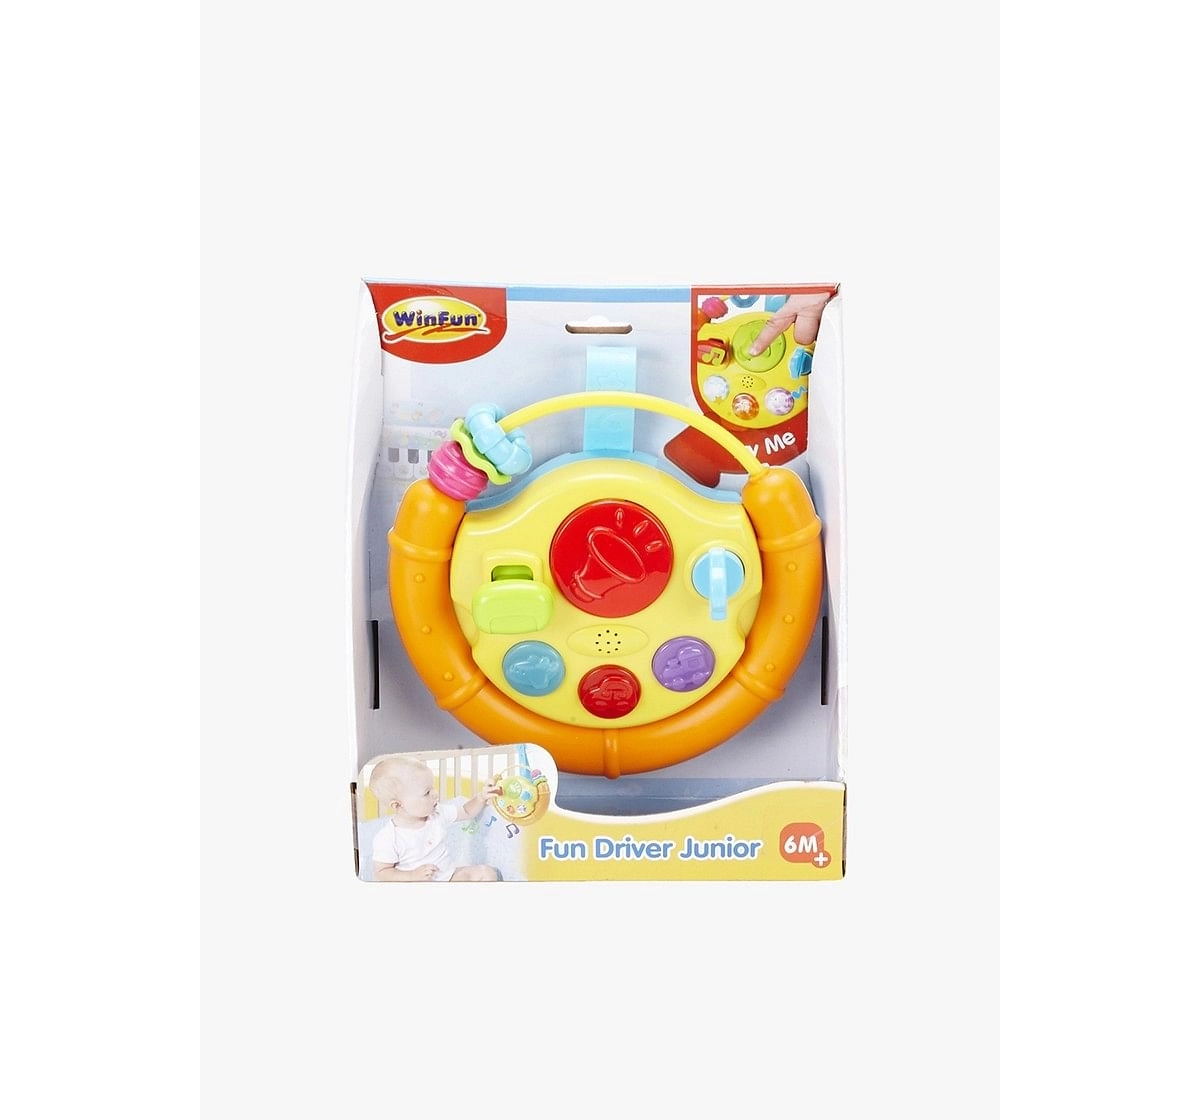 Winfun Fun Driver Junior Learning Toys for Kids age 6M+ 